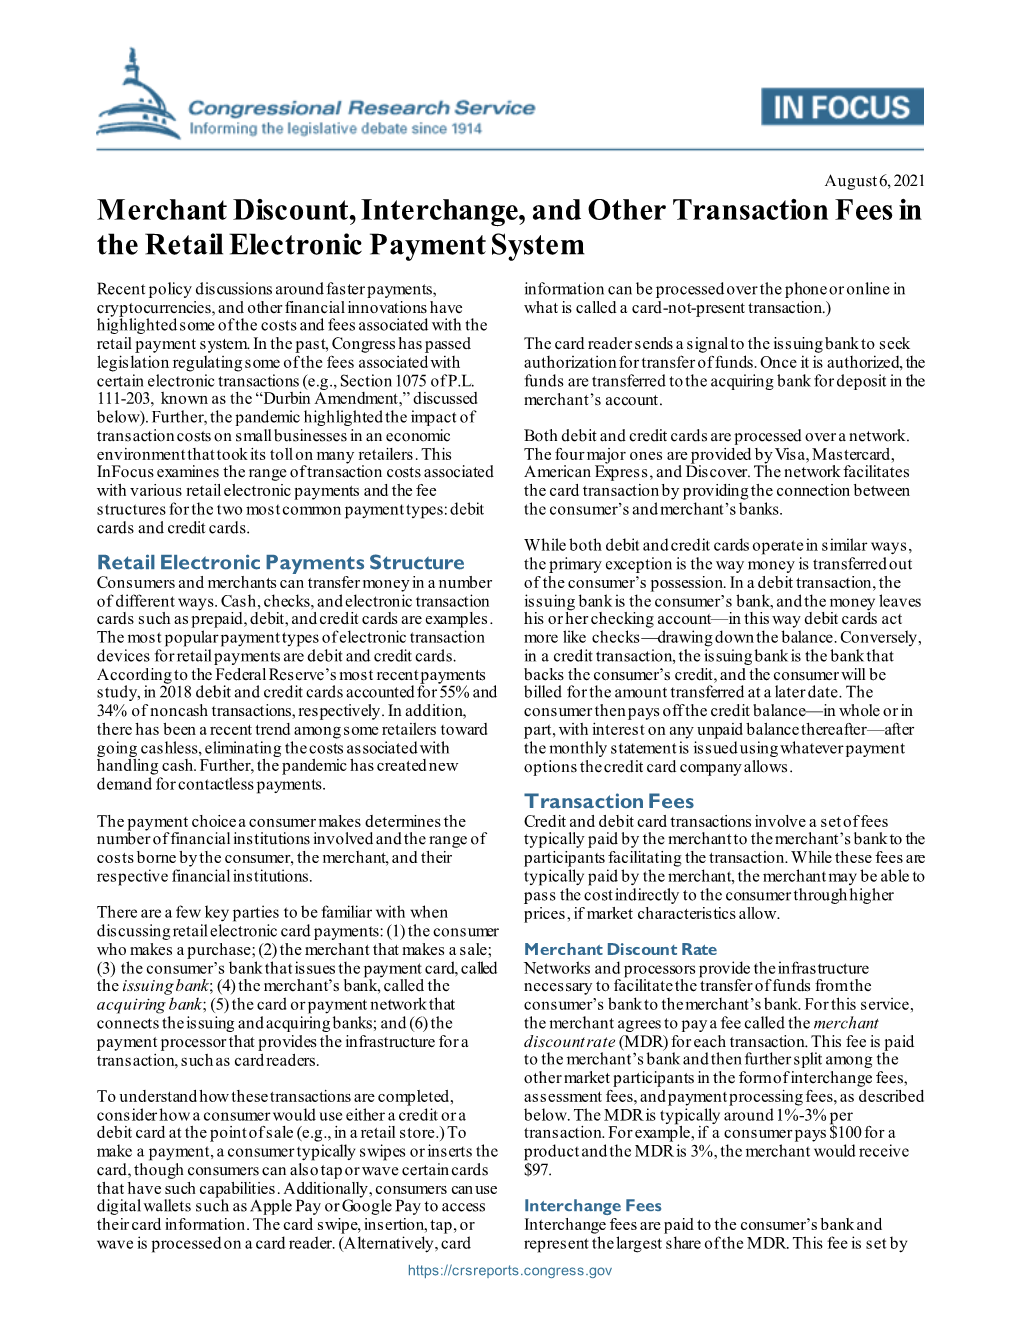 Merchant Discount, Interchange, and Other Transaction Fees in the Retail Electronic Payment System